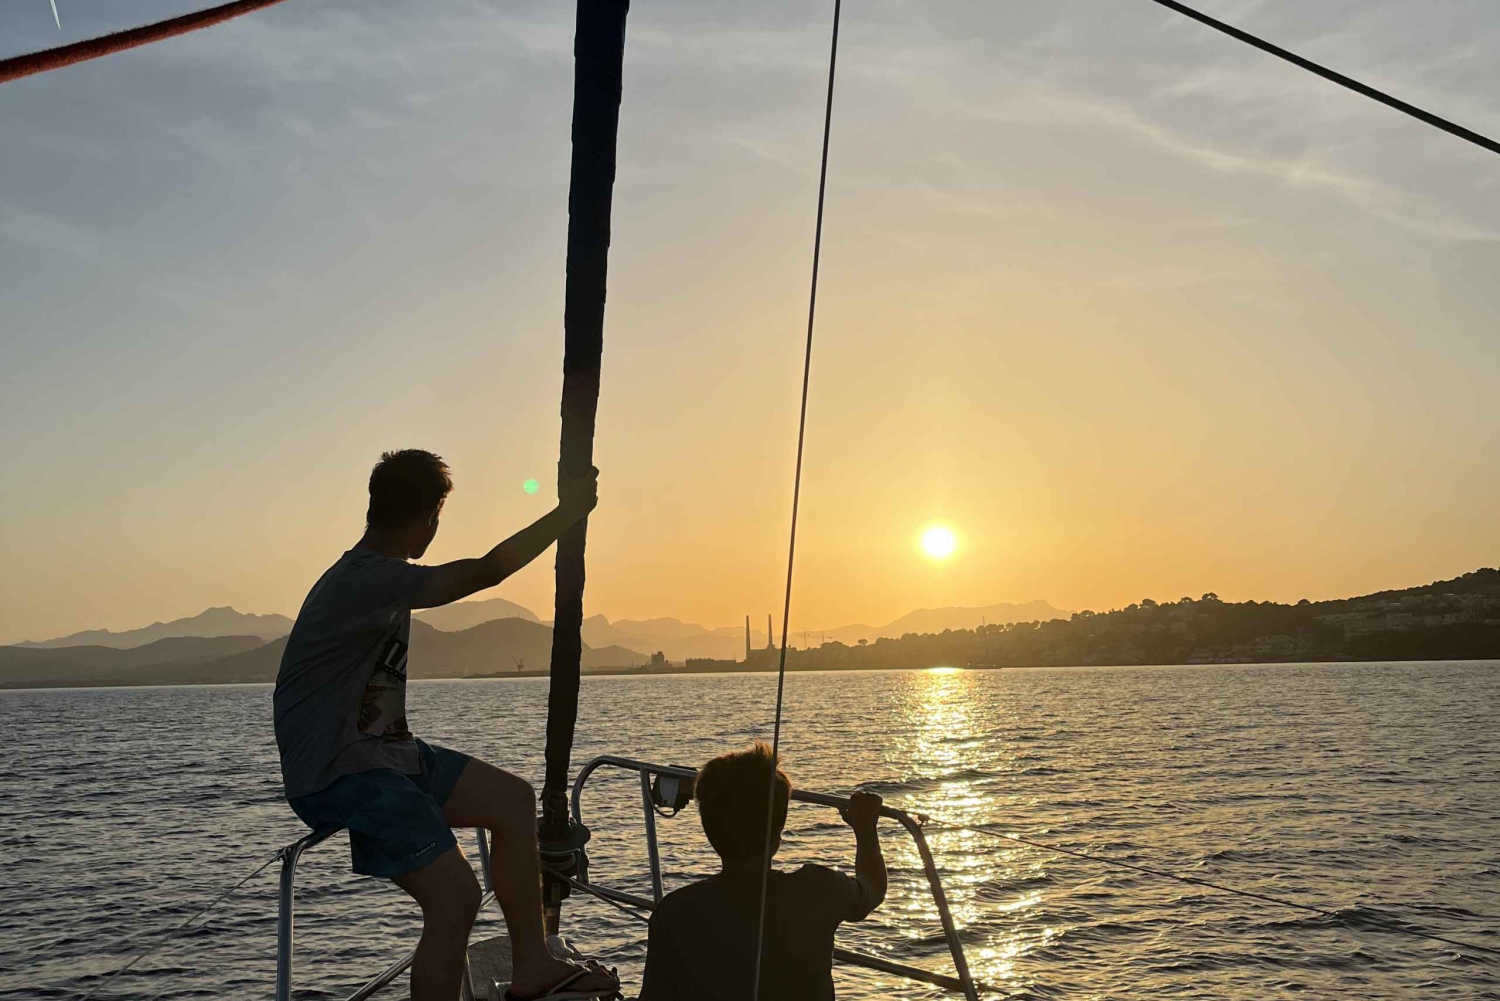 Mallorca: Sunset Sailing Trip with Snacks and Wine